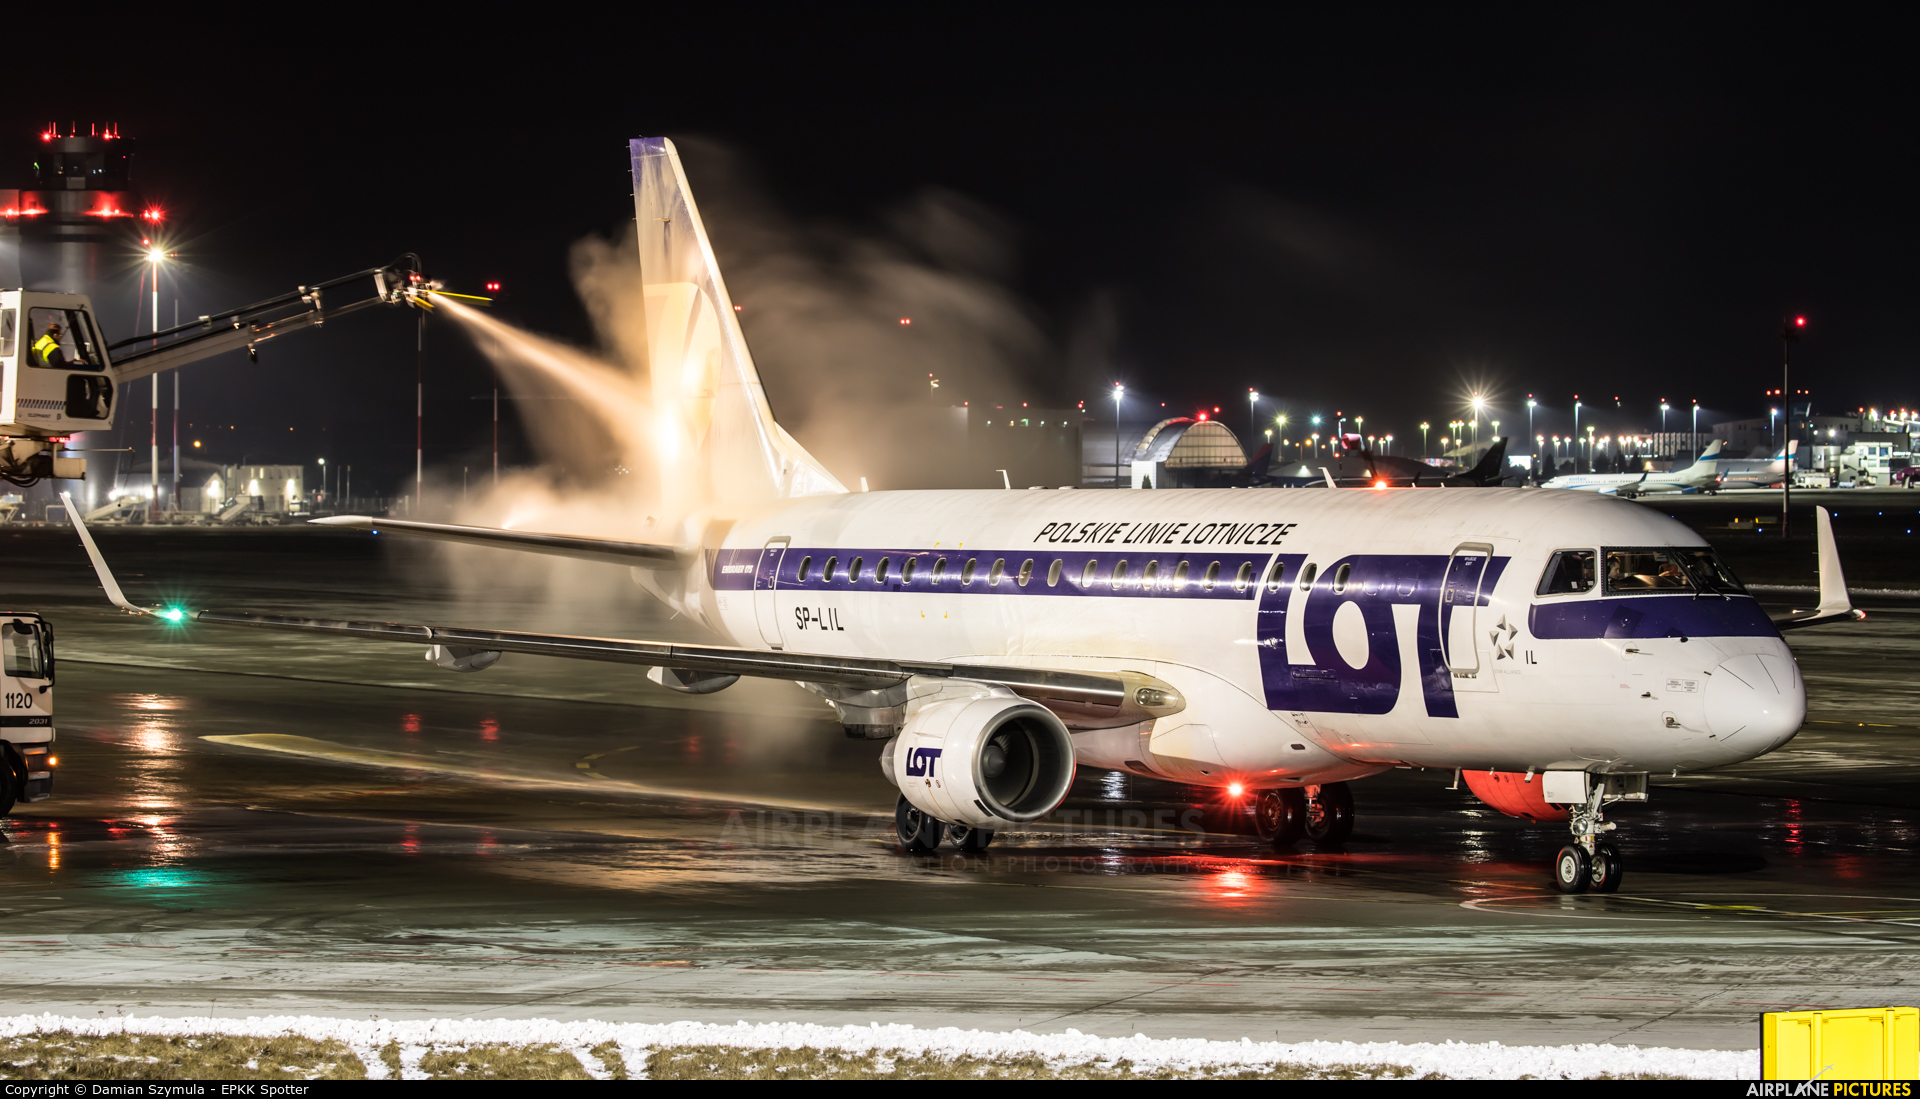 LOT - Polish Airlines SP-LIL aircraft at Katowice - Pyrzowice